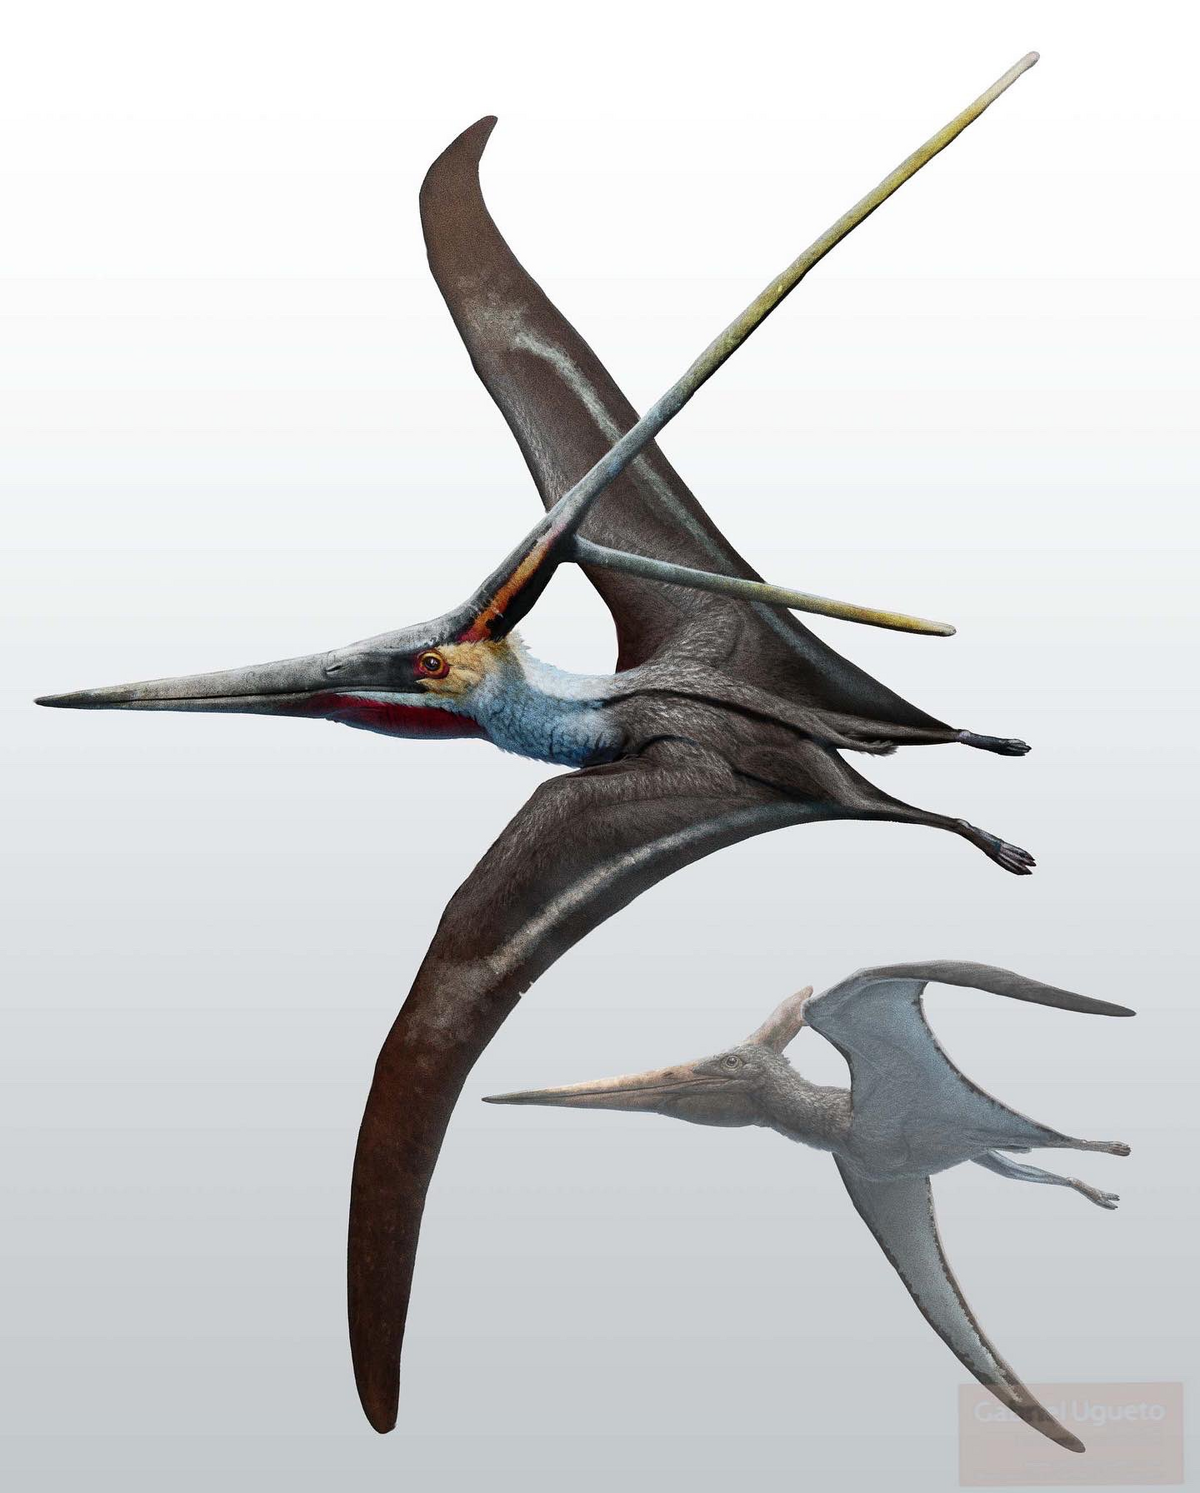 Nyctosaurus, the wild pterosaur with an antler